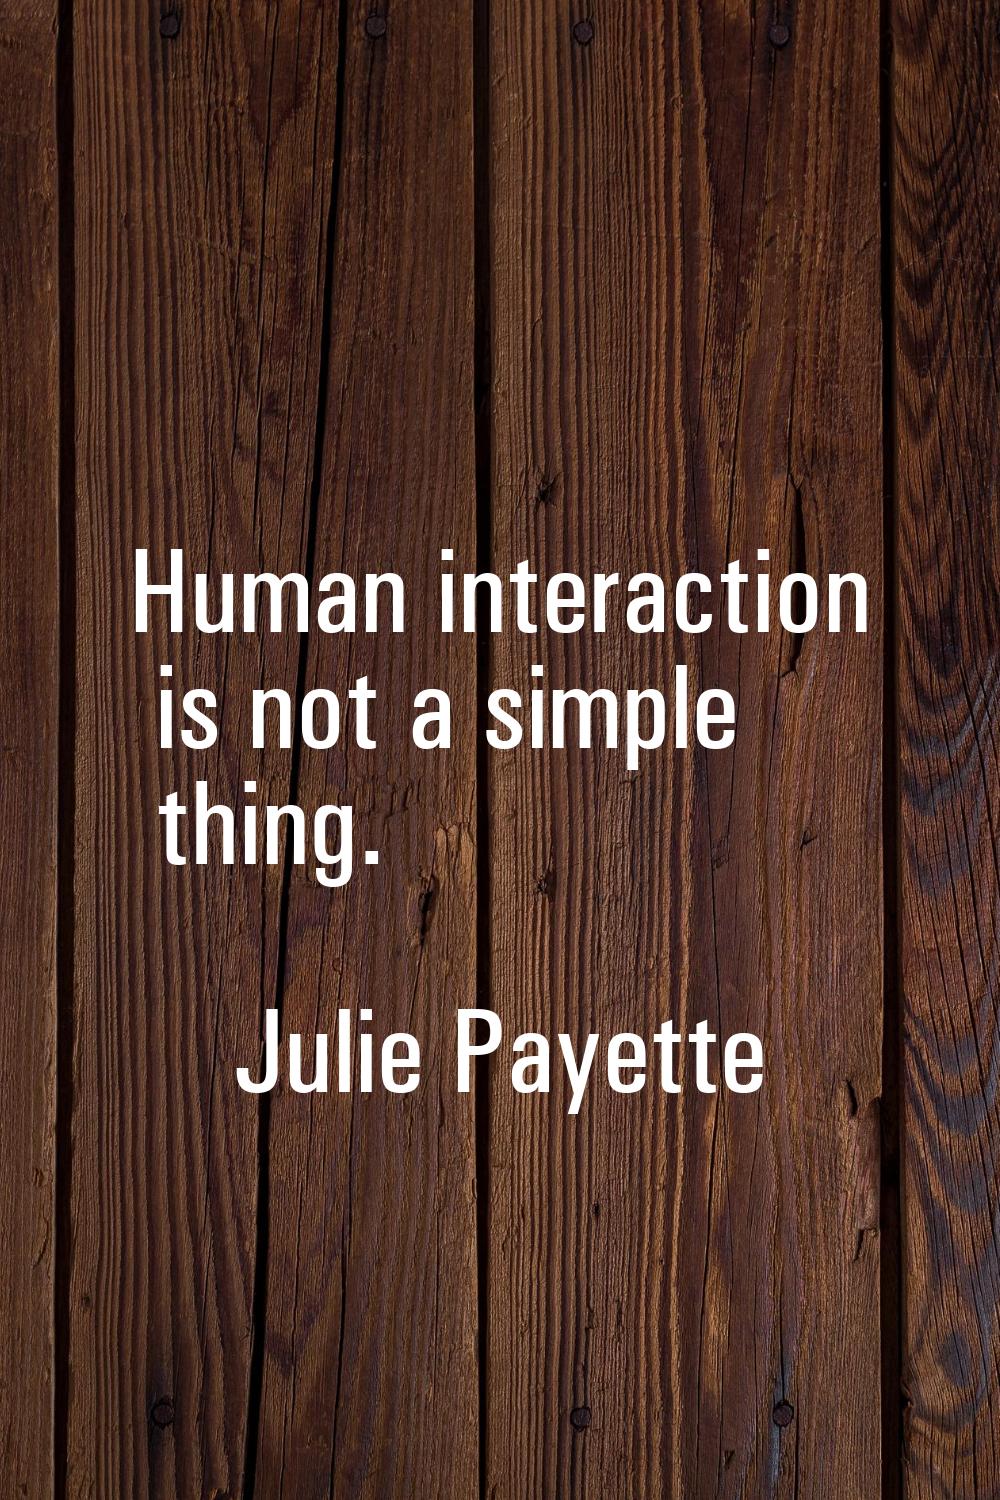 Human interaction is not a simple thing.